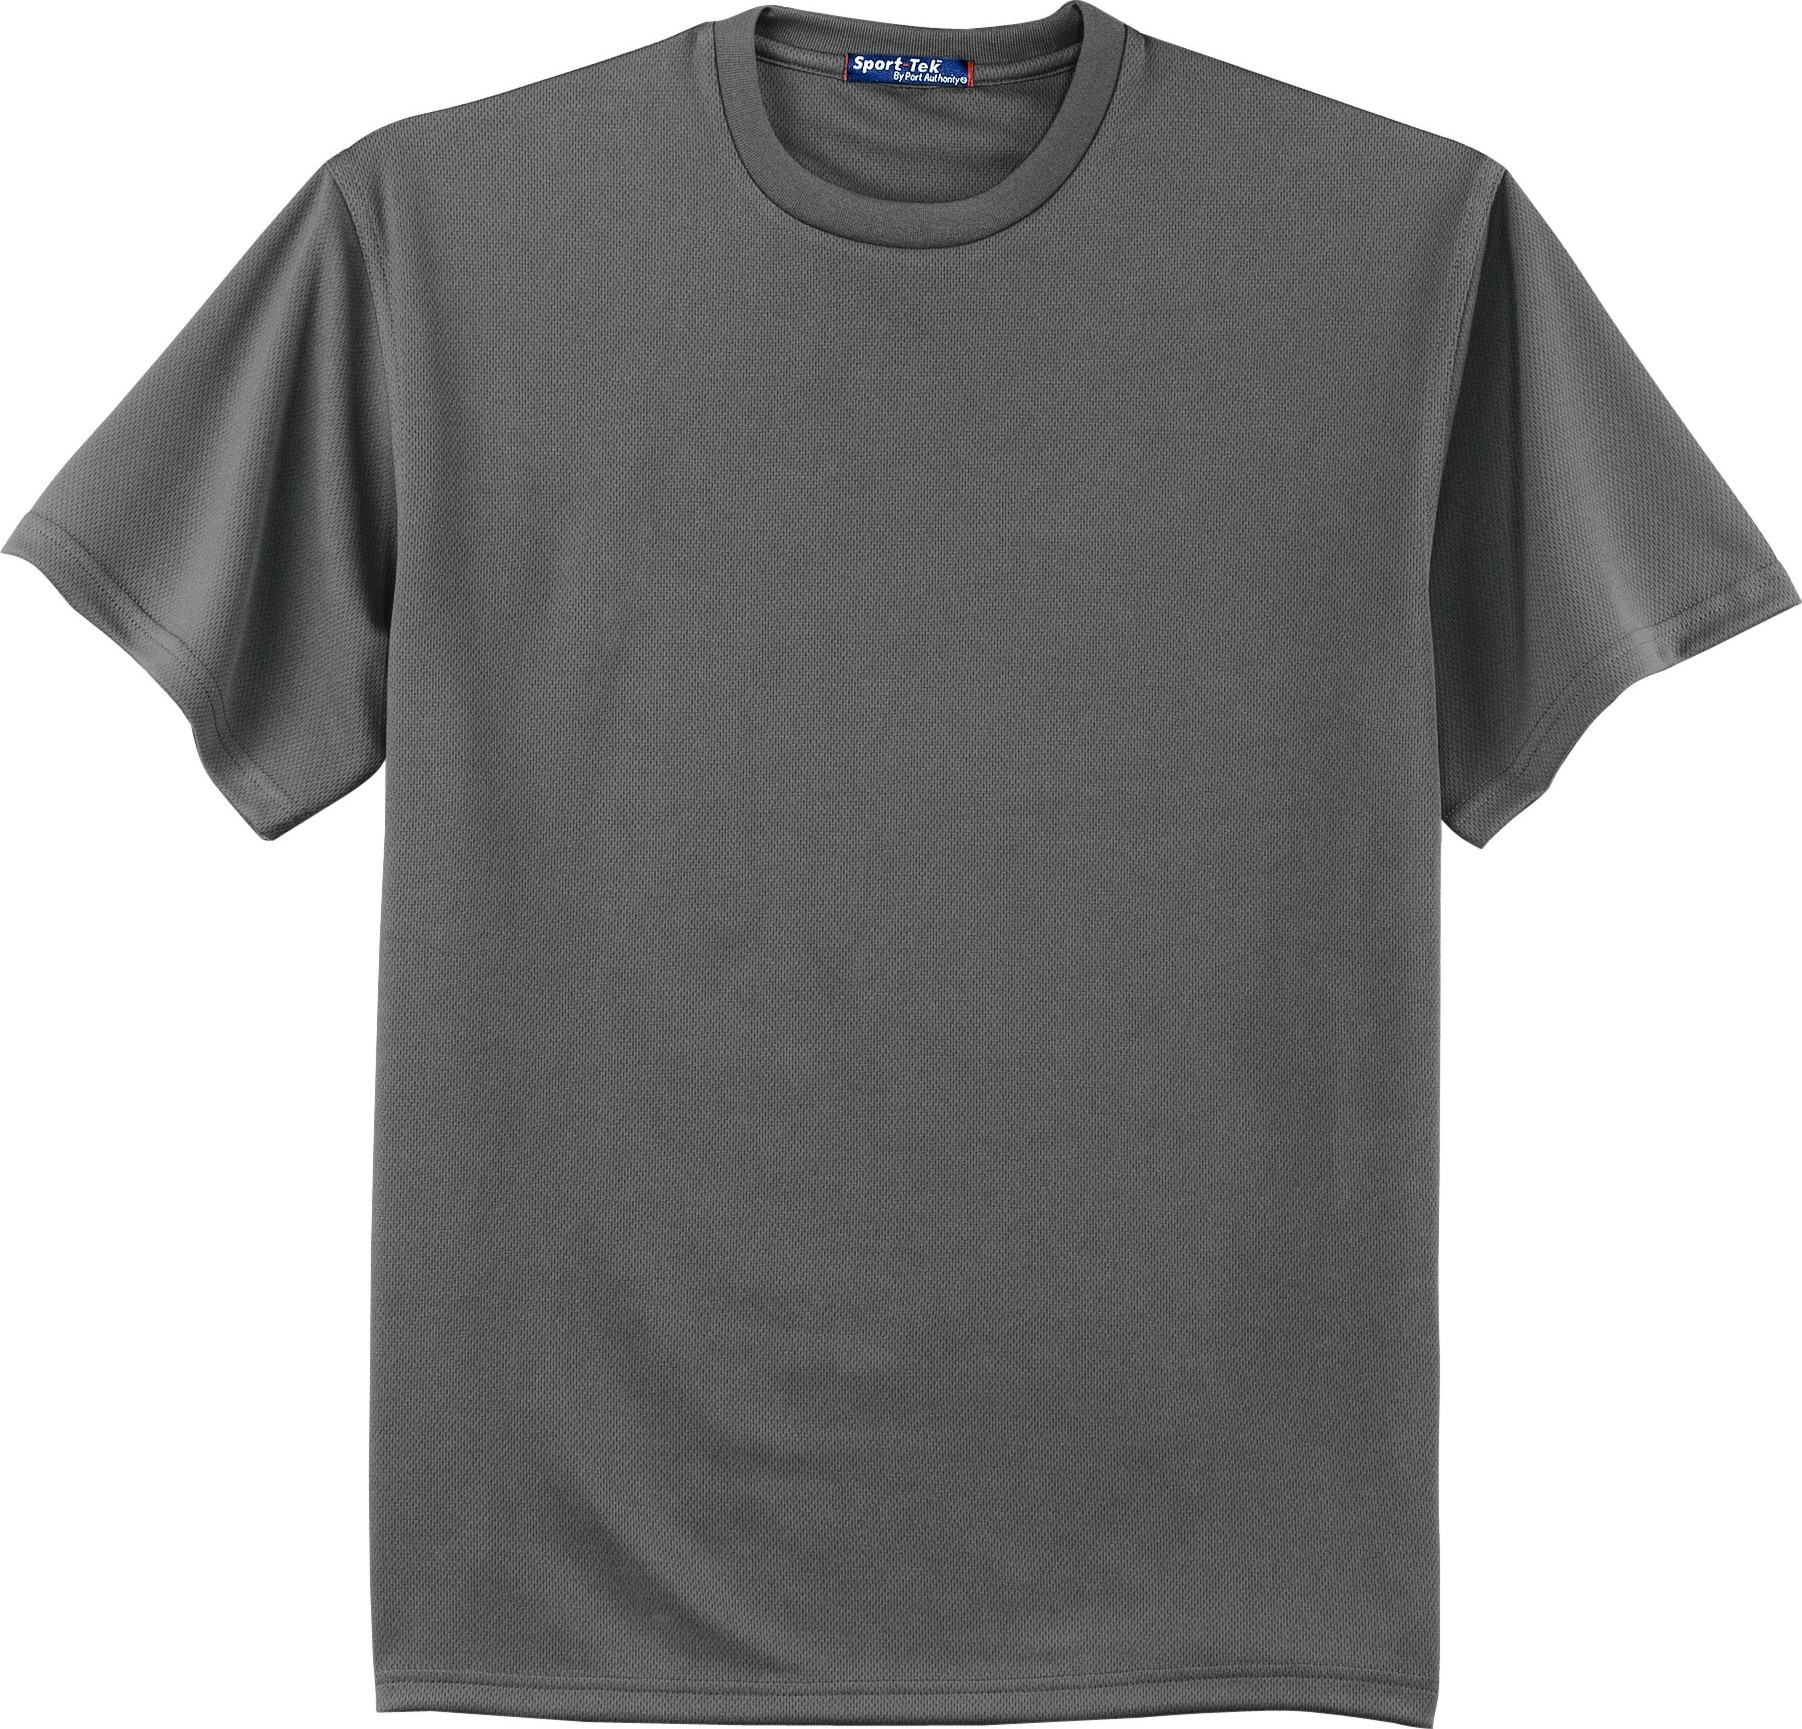 Blank T shirt Cliparts co